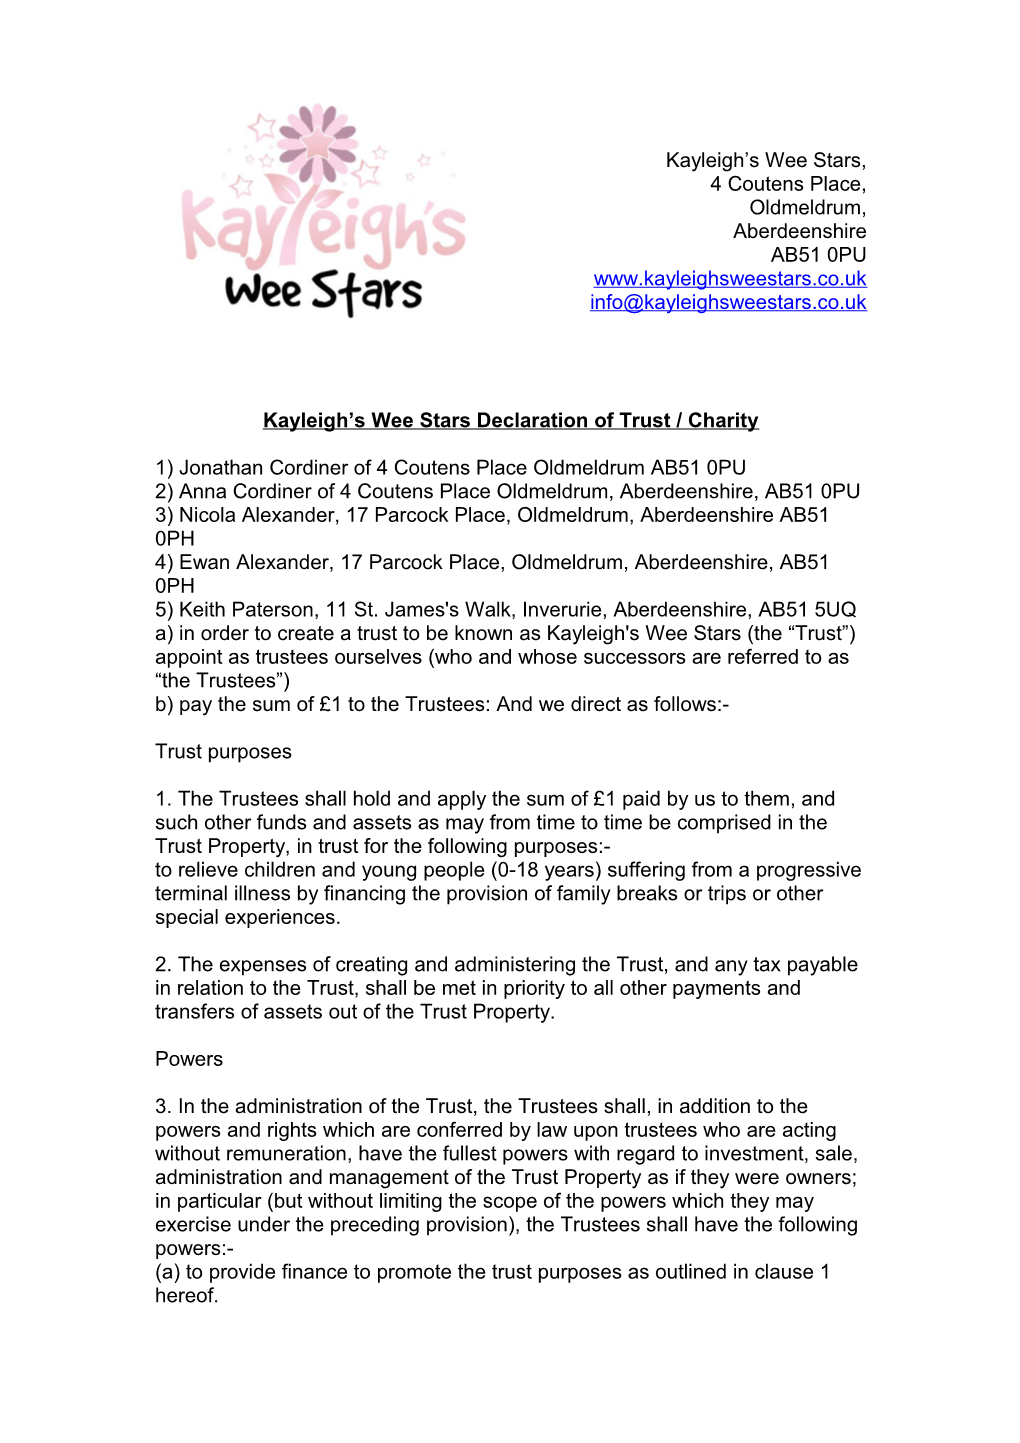 Kayleigh S Wee Stars Declaration of Trust / Charity